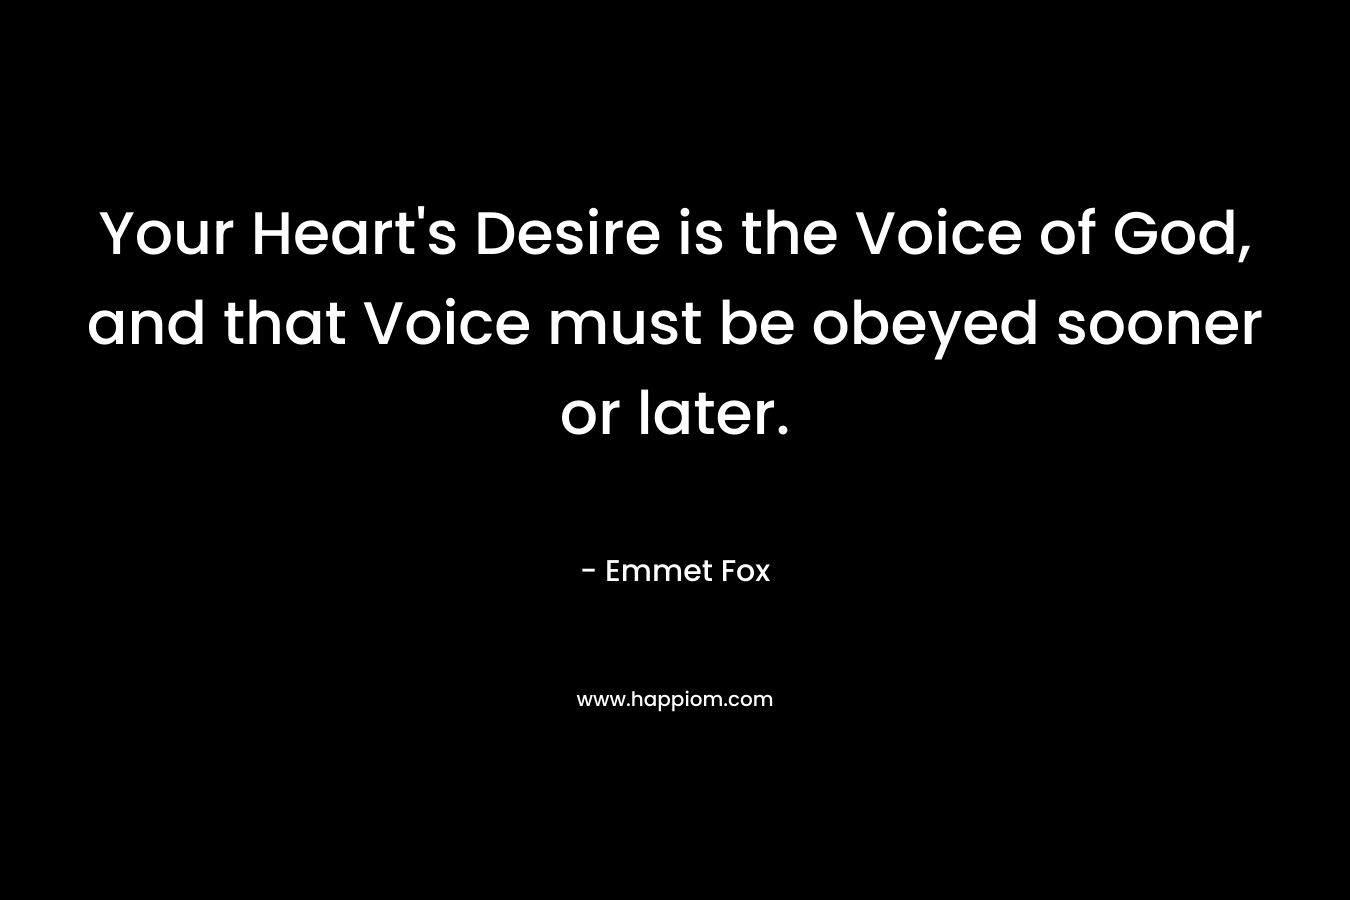 Your Heart’s Desire is the Voice of God, and that Voice must be obeyed sooner or later. – Emmet Fox